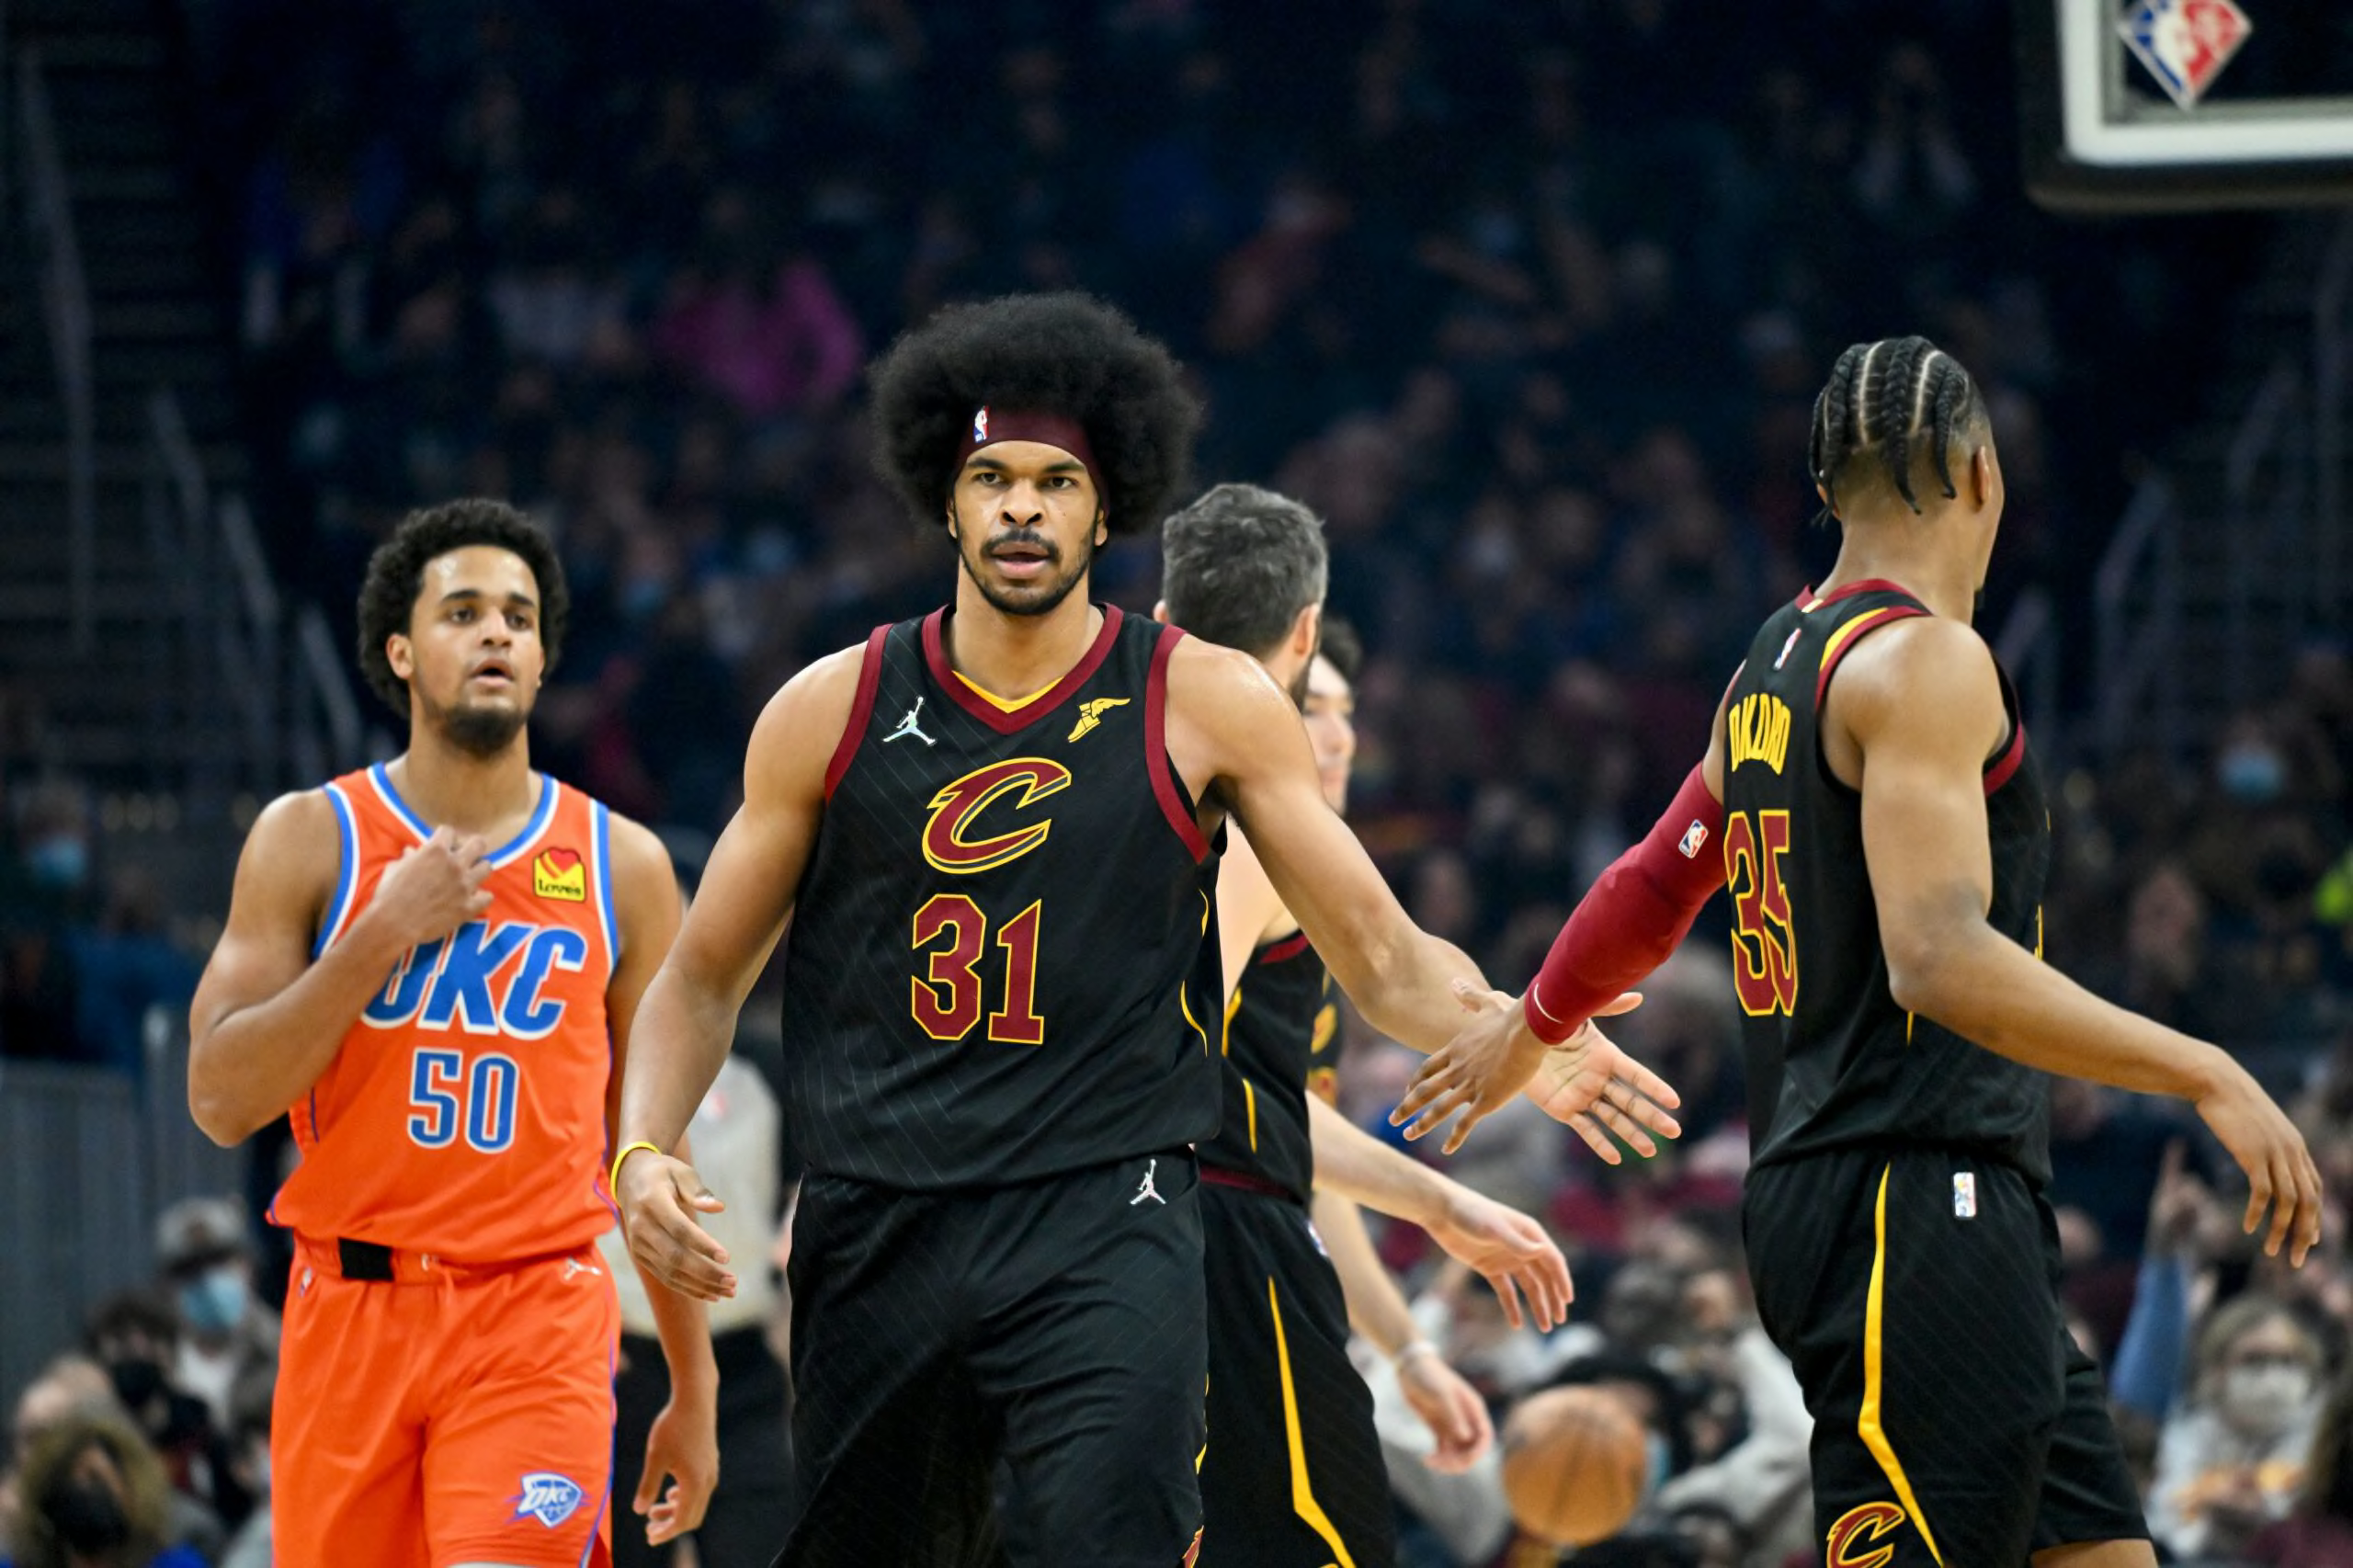 Cleveland Cavaliers' Evan Mobley and Isaac Okoro selected to 2022